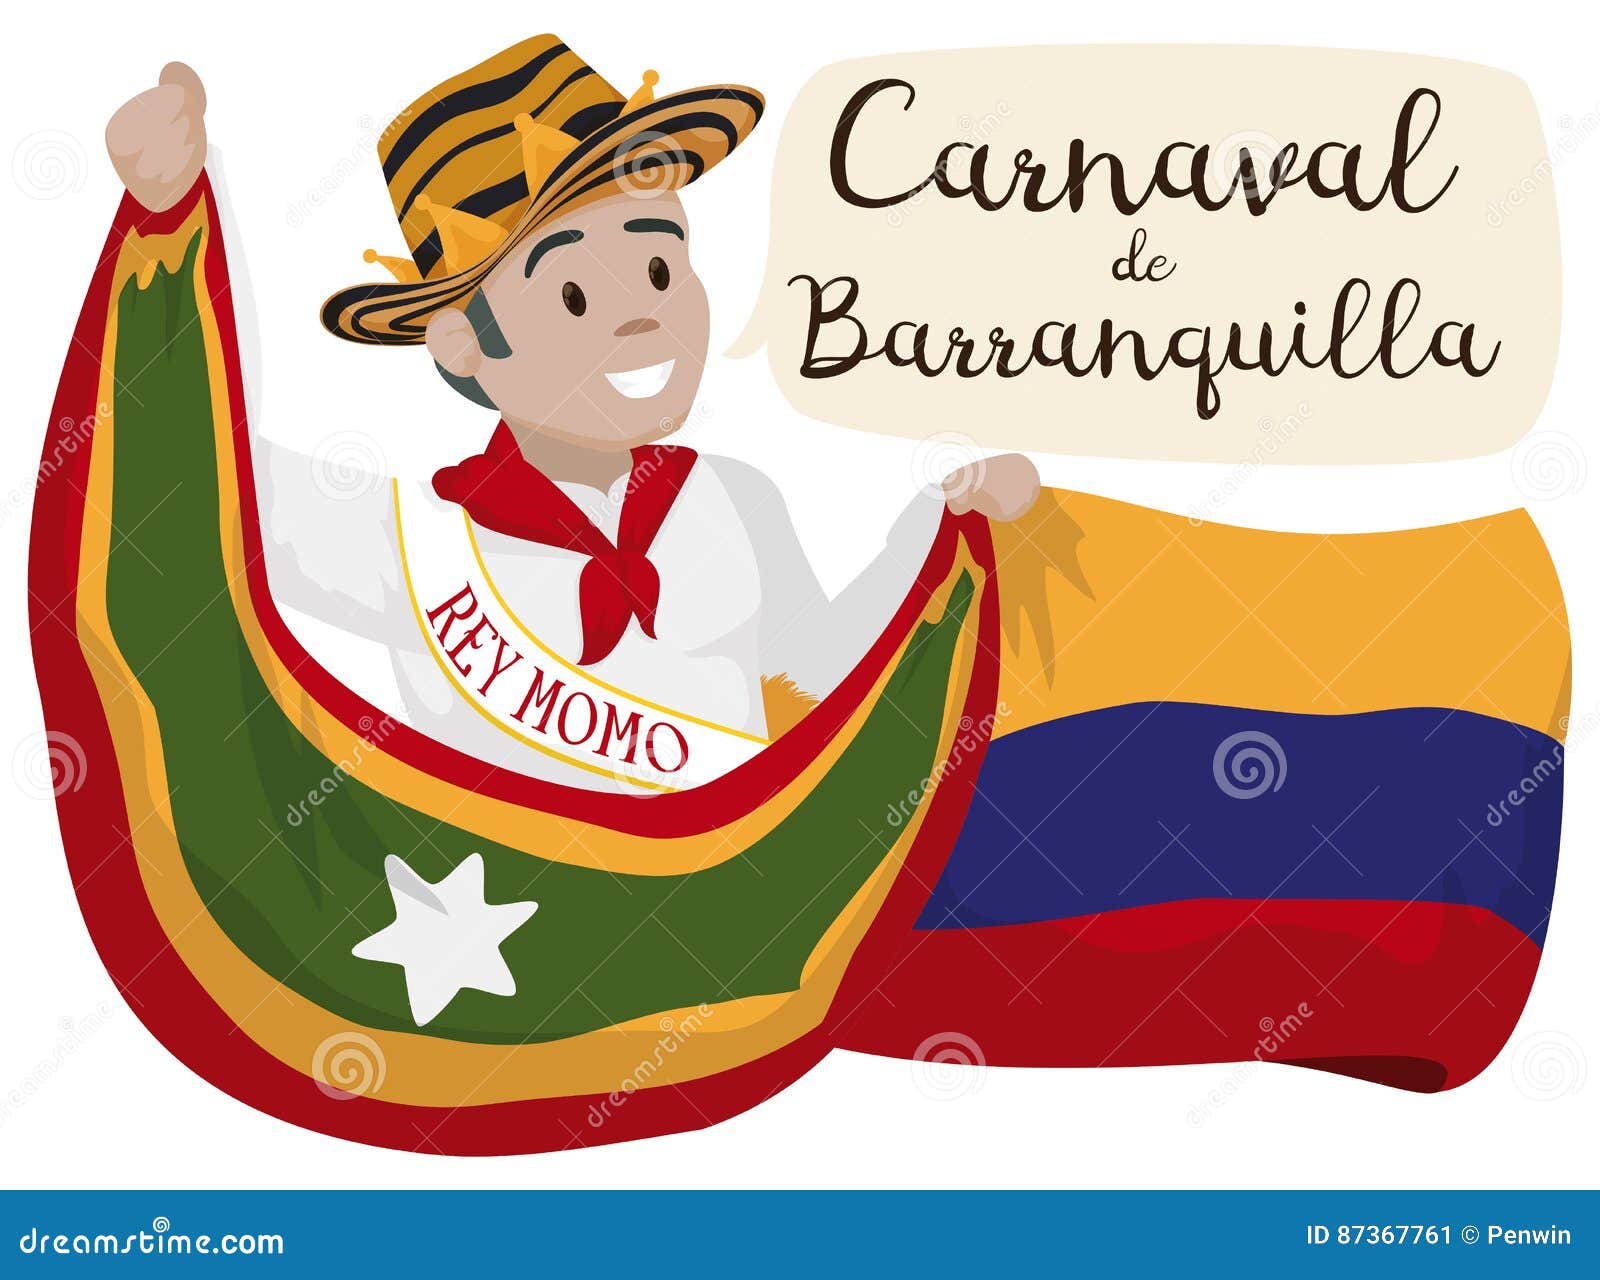 momo king celebrating barranquilla`s carnival with colombia and barranquilla flags,  